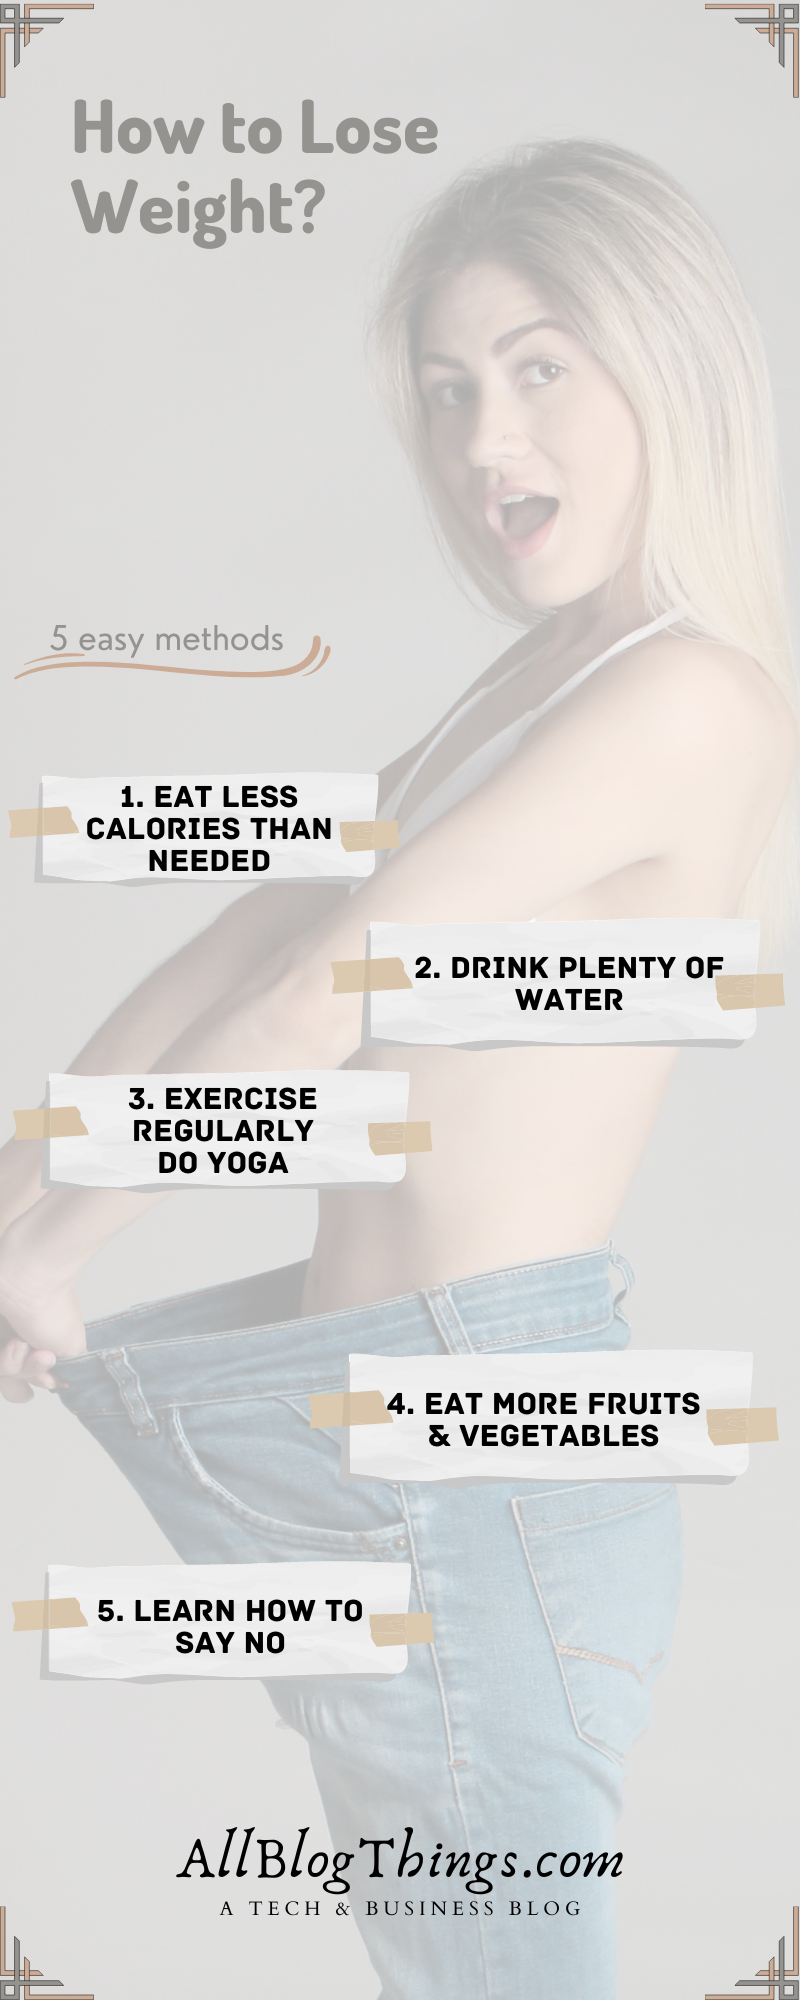 How to Lose Weight? – 5 Easy Methods (Infographic)